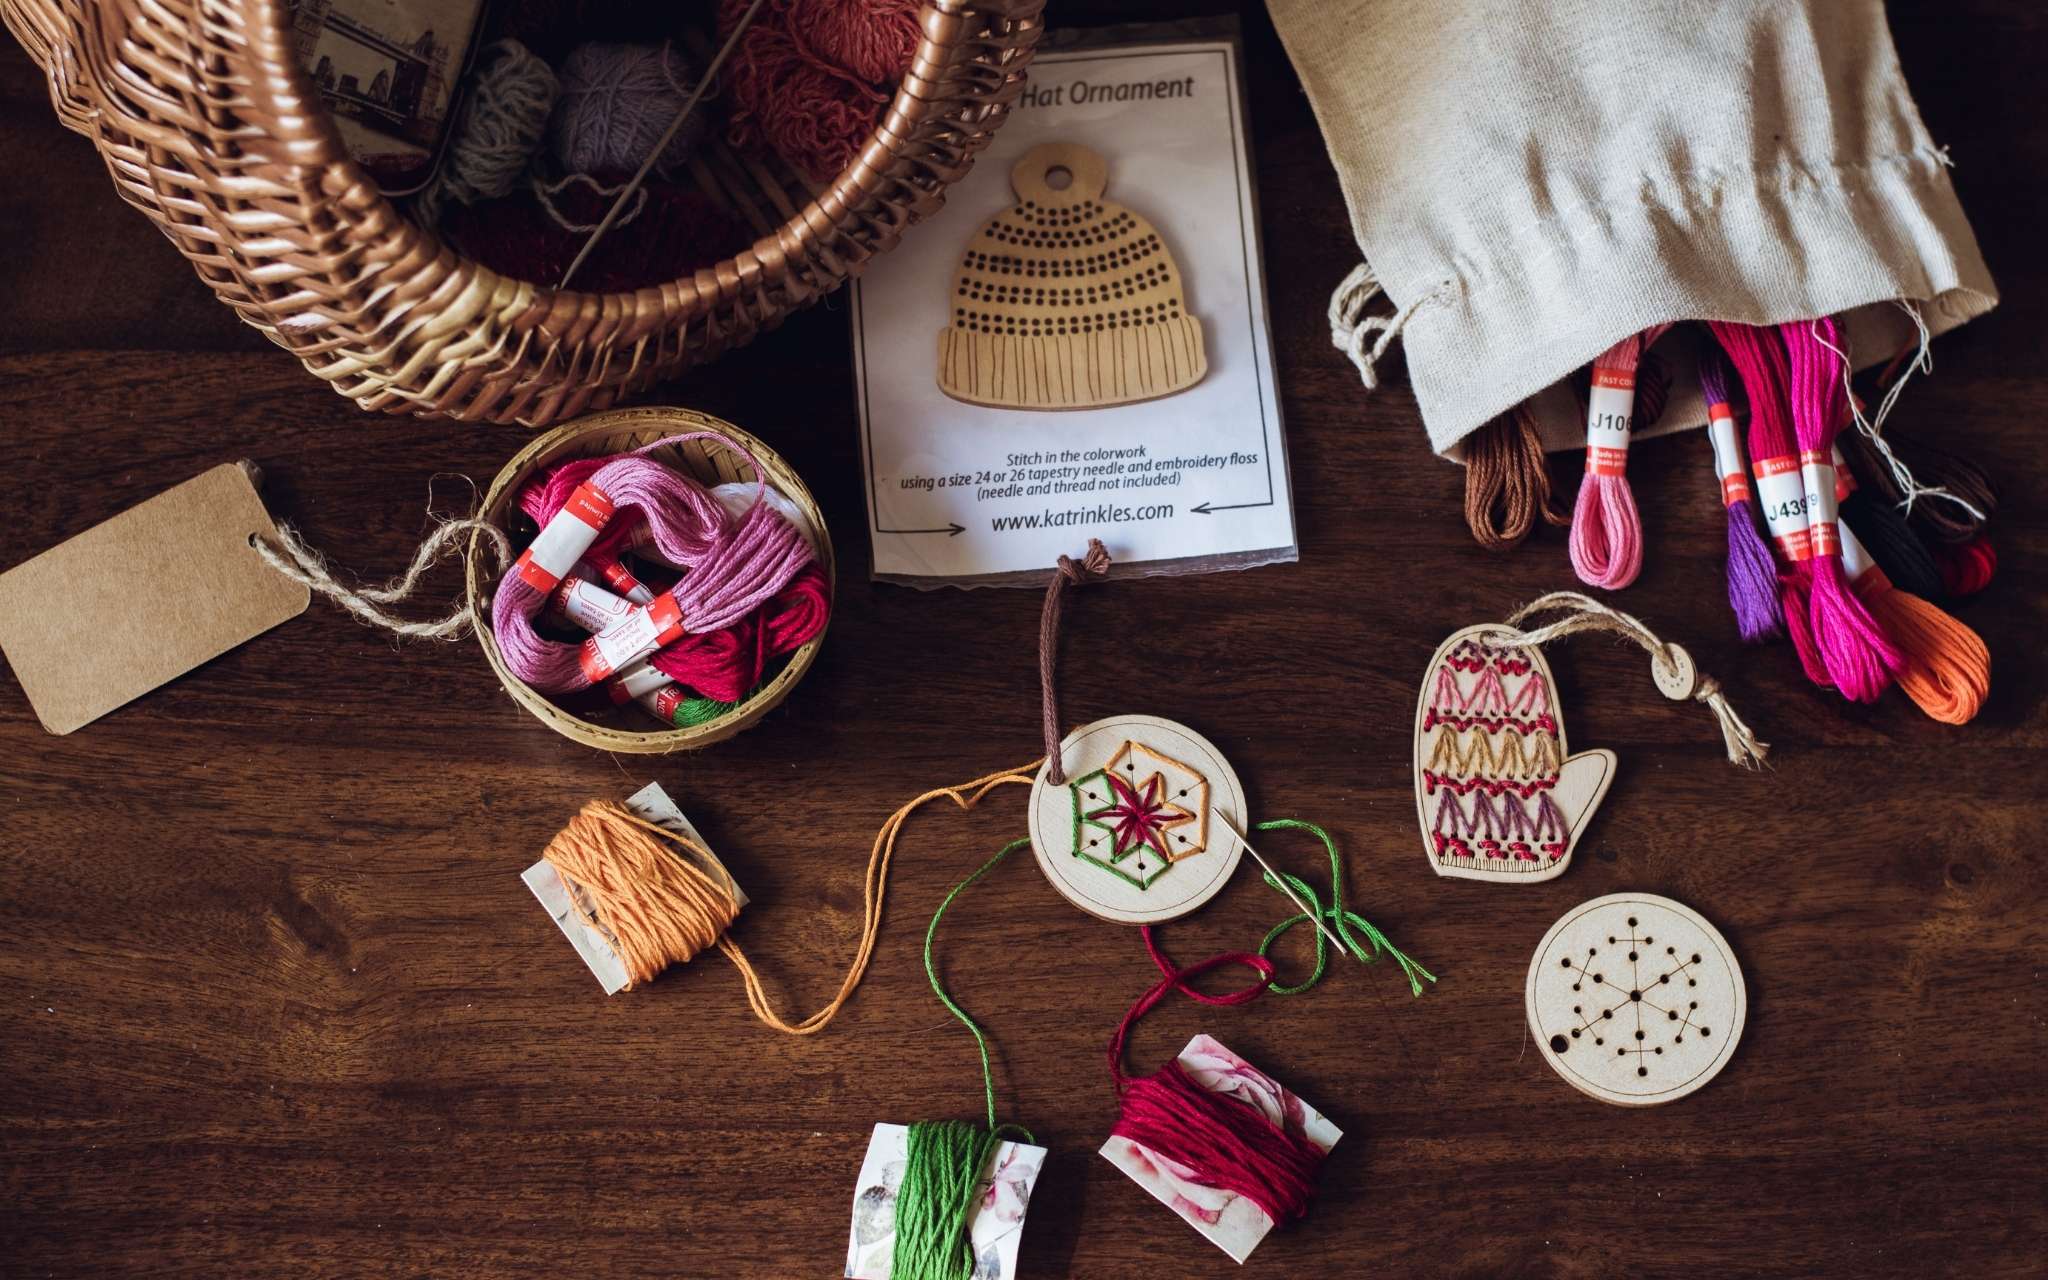 A selection of wooden hanging ornaments lie on a flat surface next to a wicker basket, and a pile of brightly coloured threads.